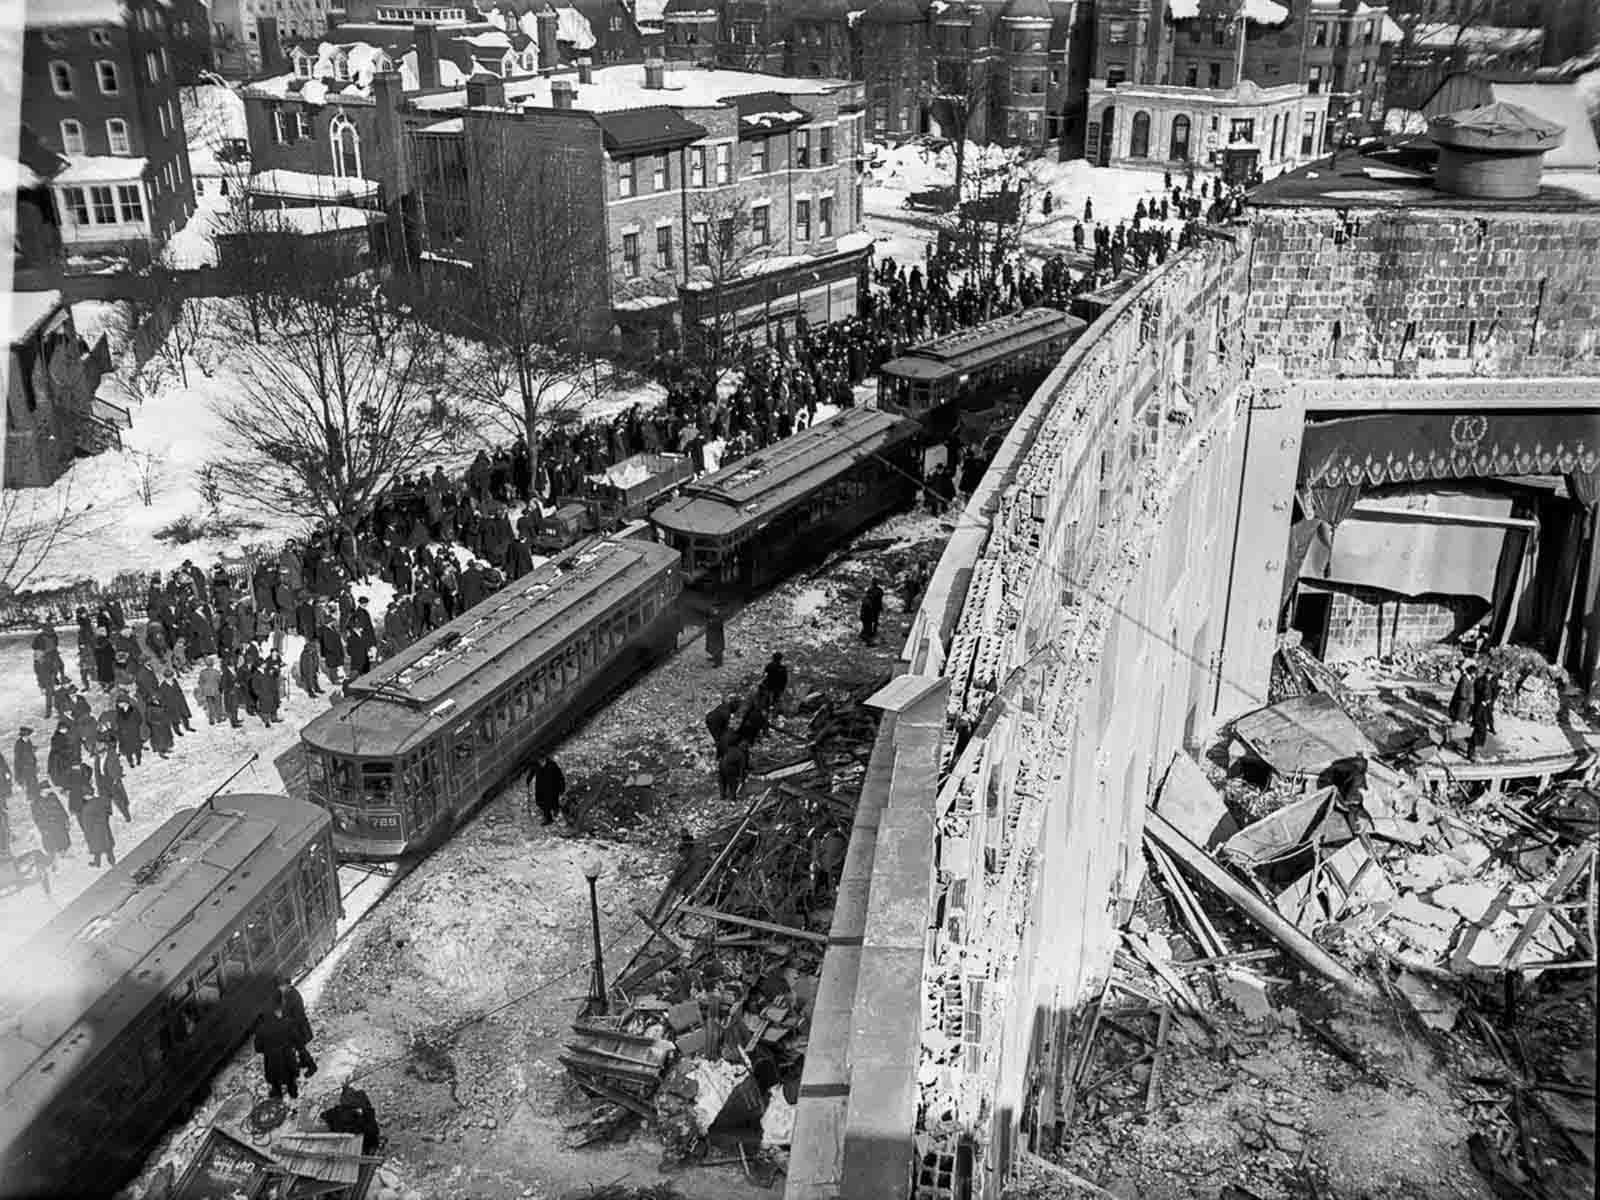 Crowds gather outside the ruins of the collapsed Knickerbocker Theatre.